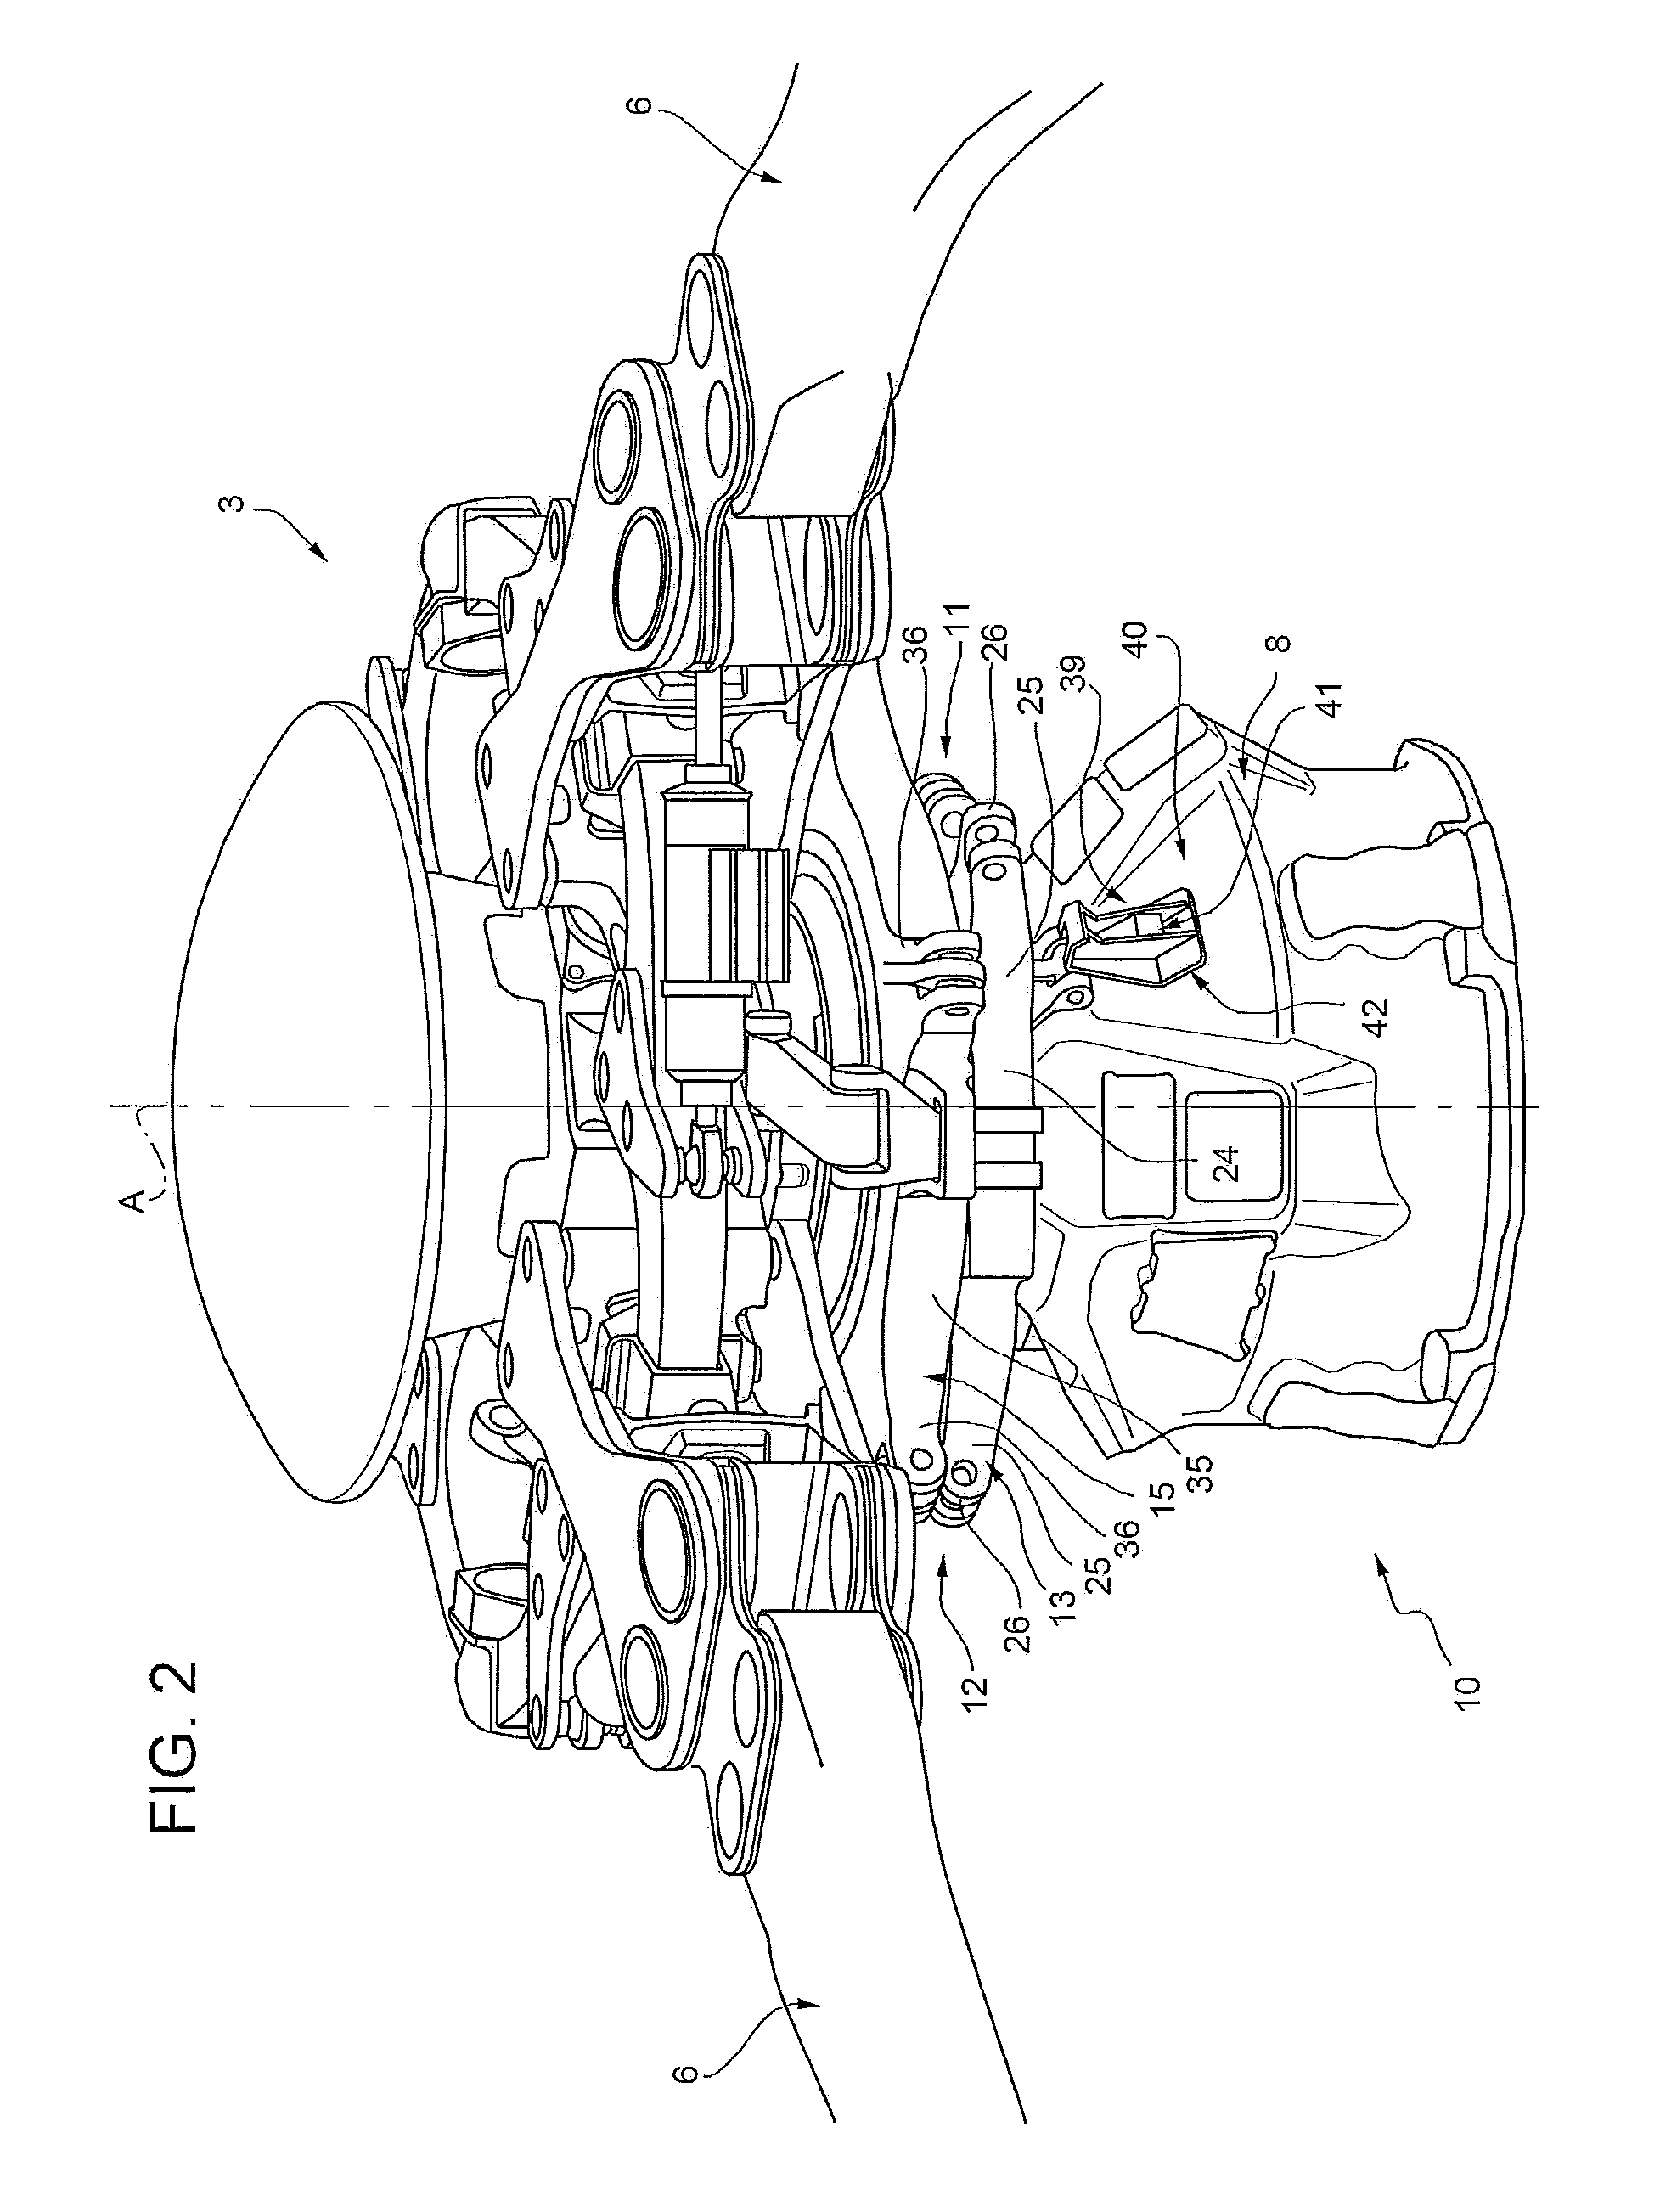 Rotor assembly for an aircraft capable of hovering and equipped with an improved constraint assembly